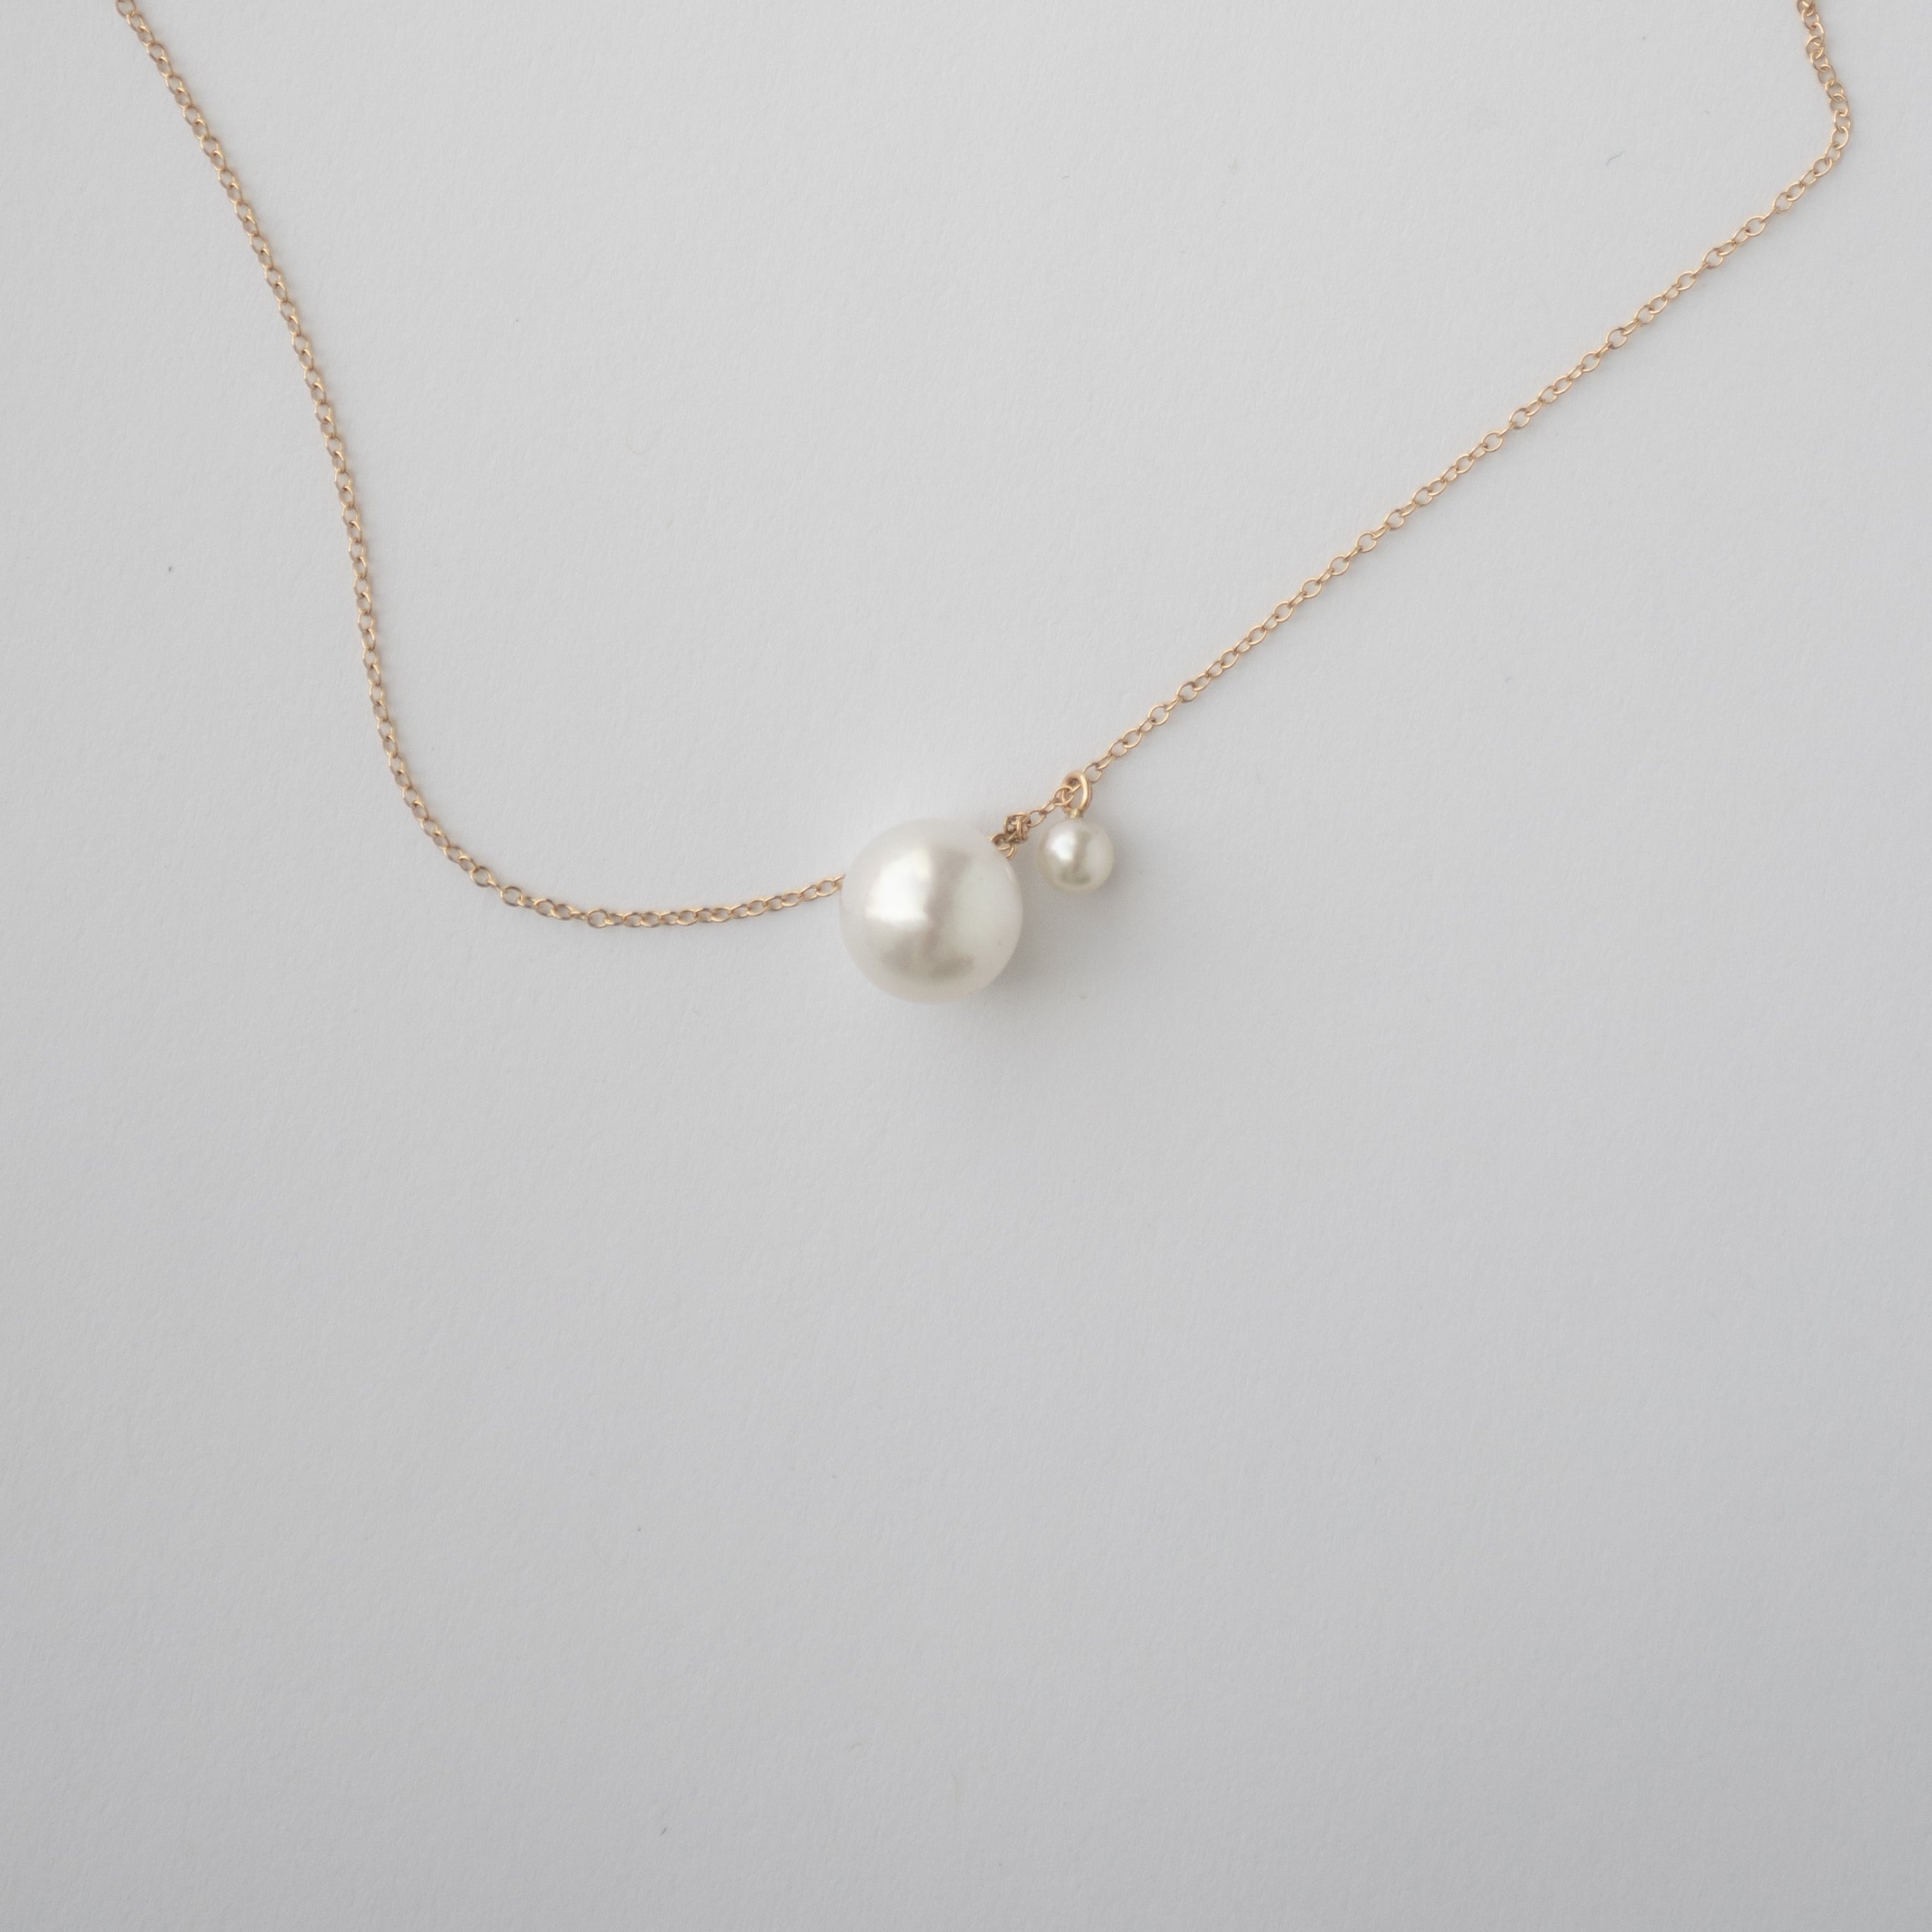 Handmade RIti necklace in 14 karat yellow gold with pearls made in NYC by SHW fine Jewelry